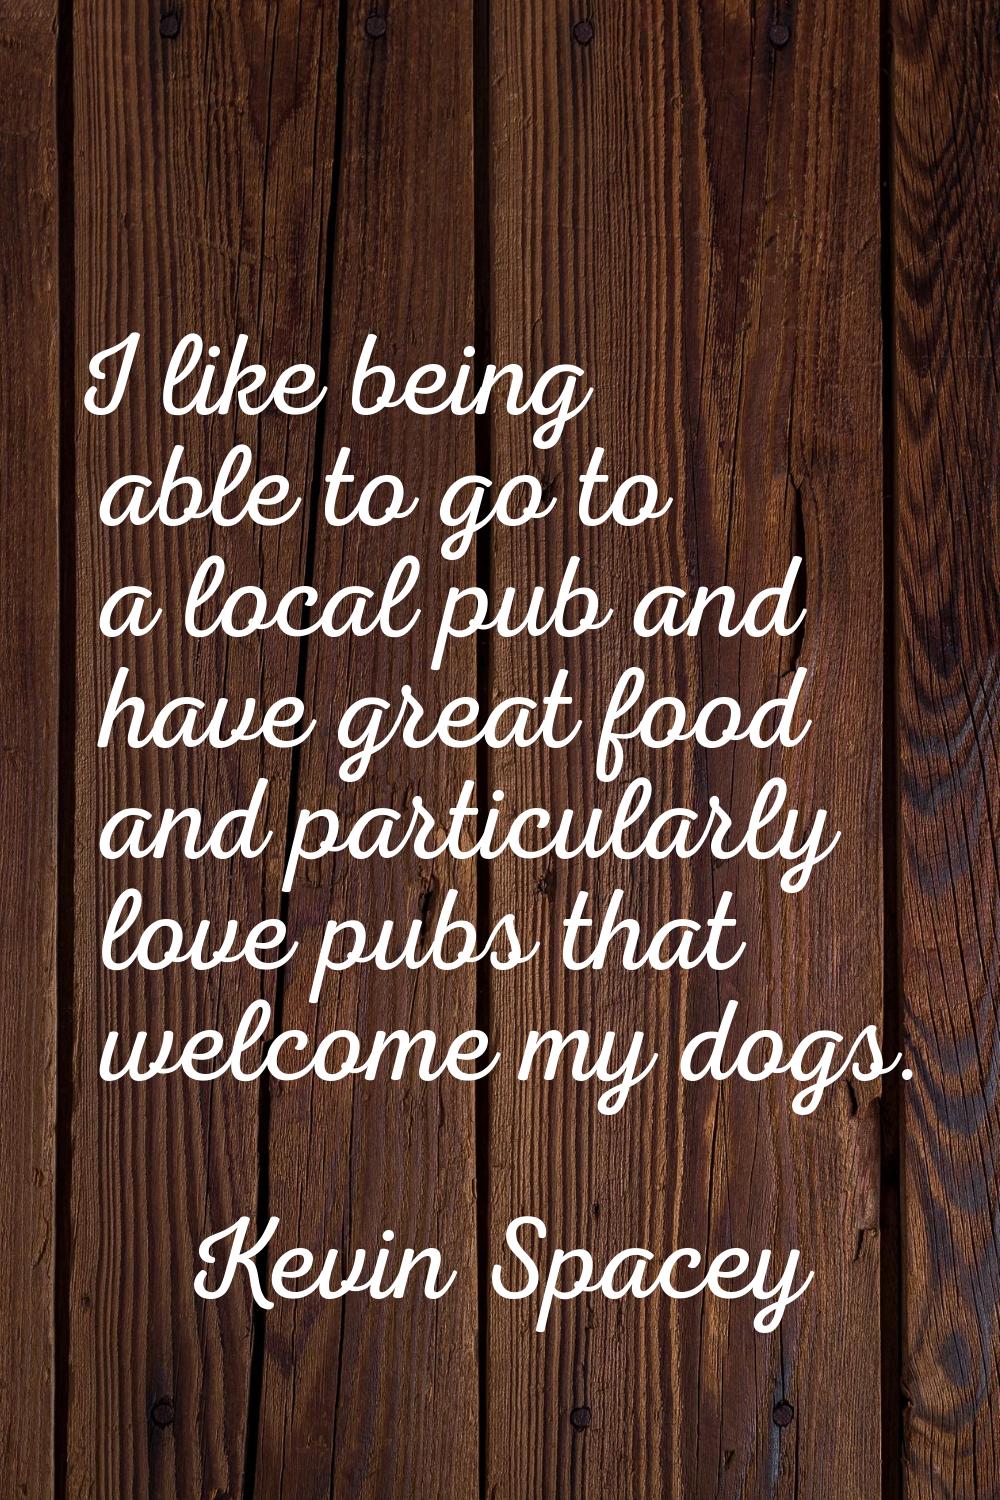 I like being able to go to a local pub and have great food and particularly love pubs that welcome 